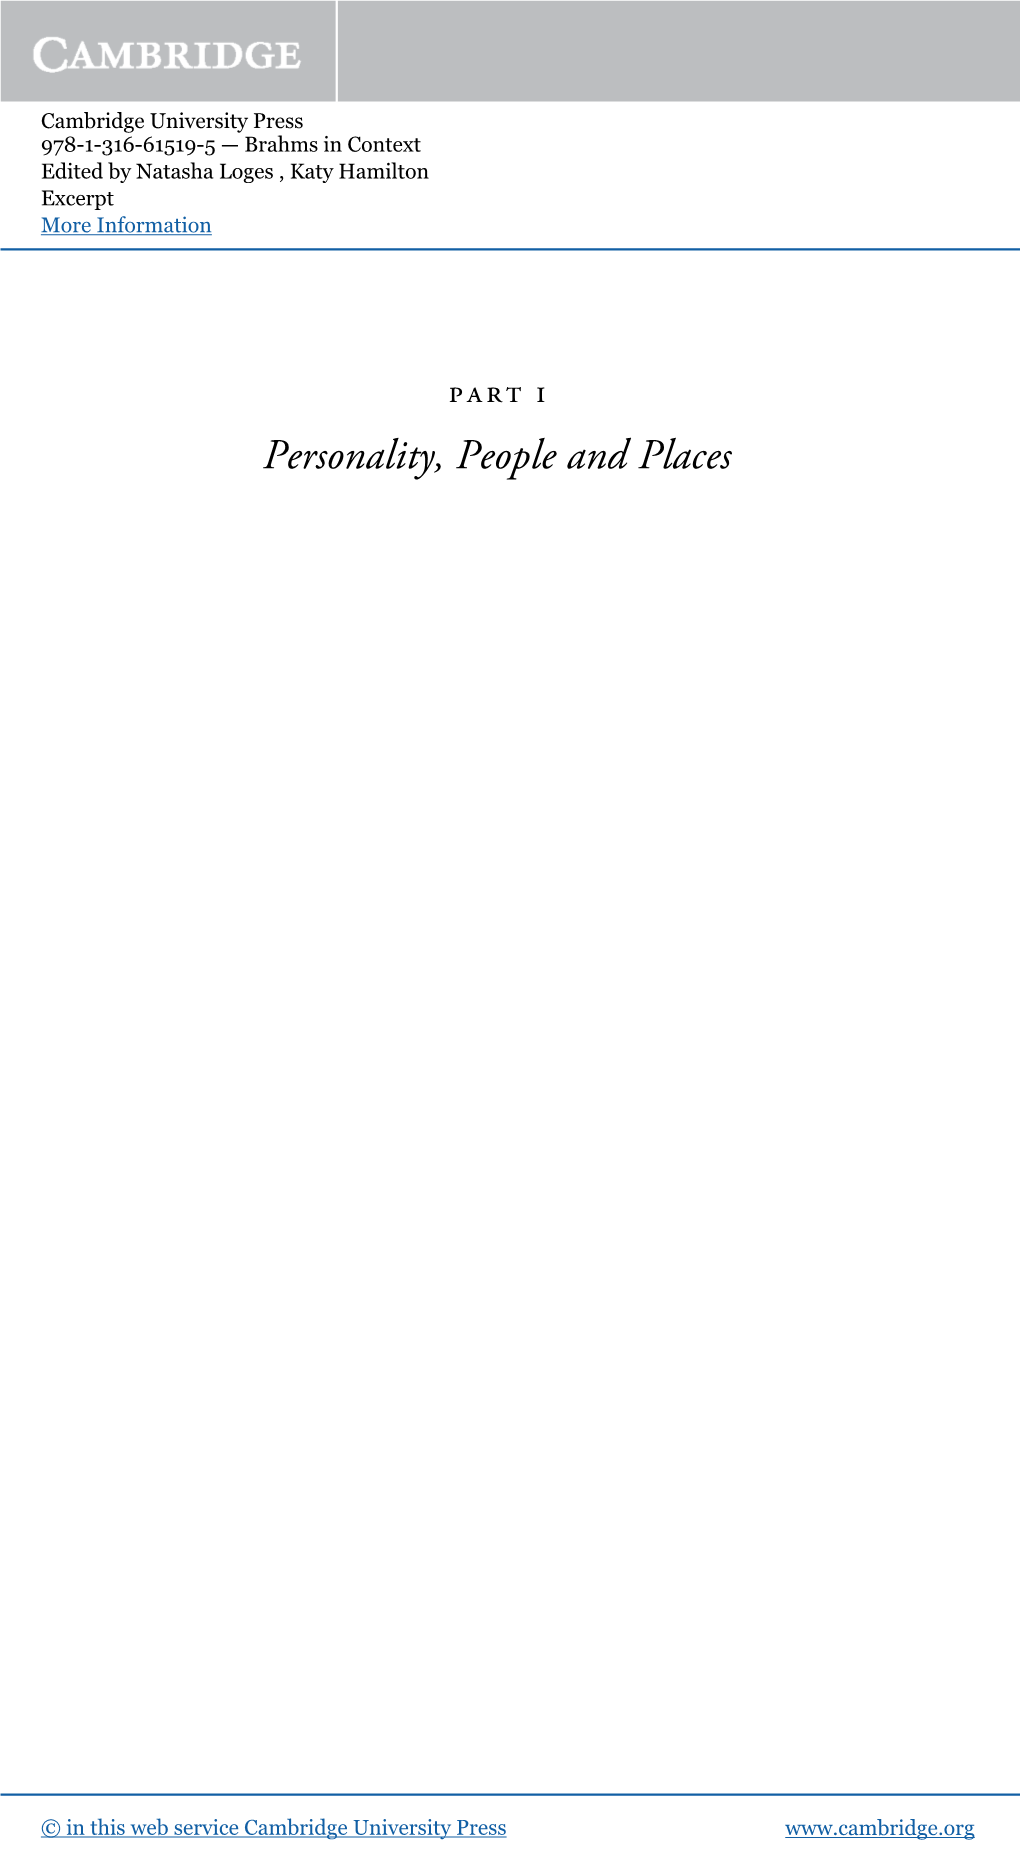 Personality, People and Places